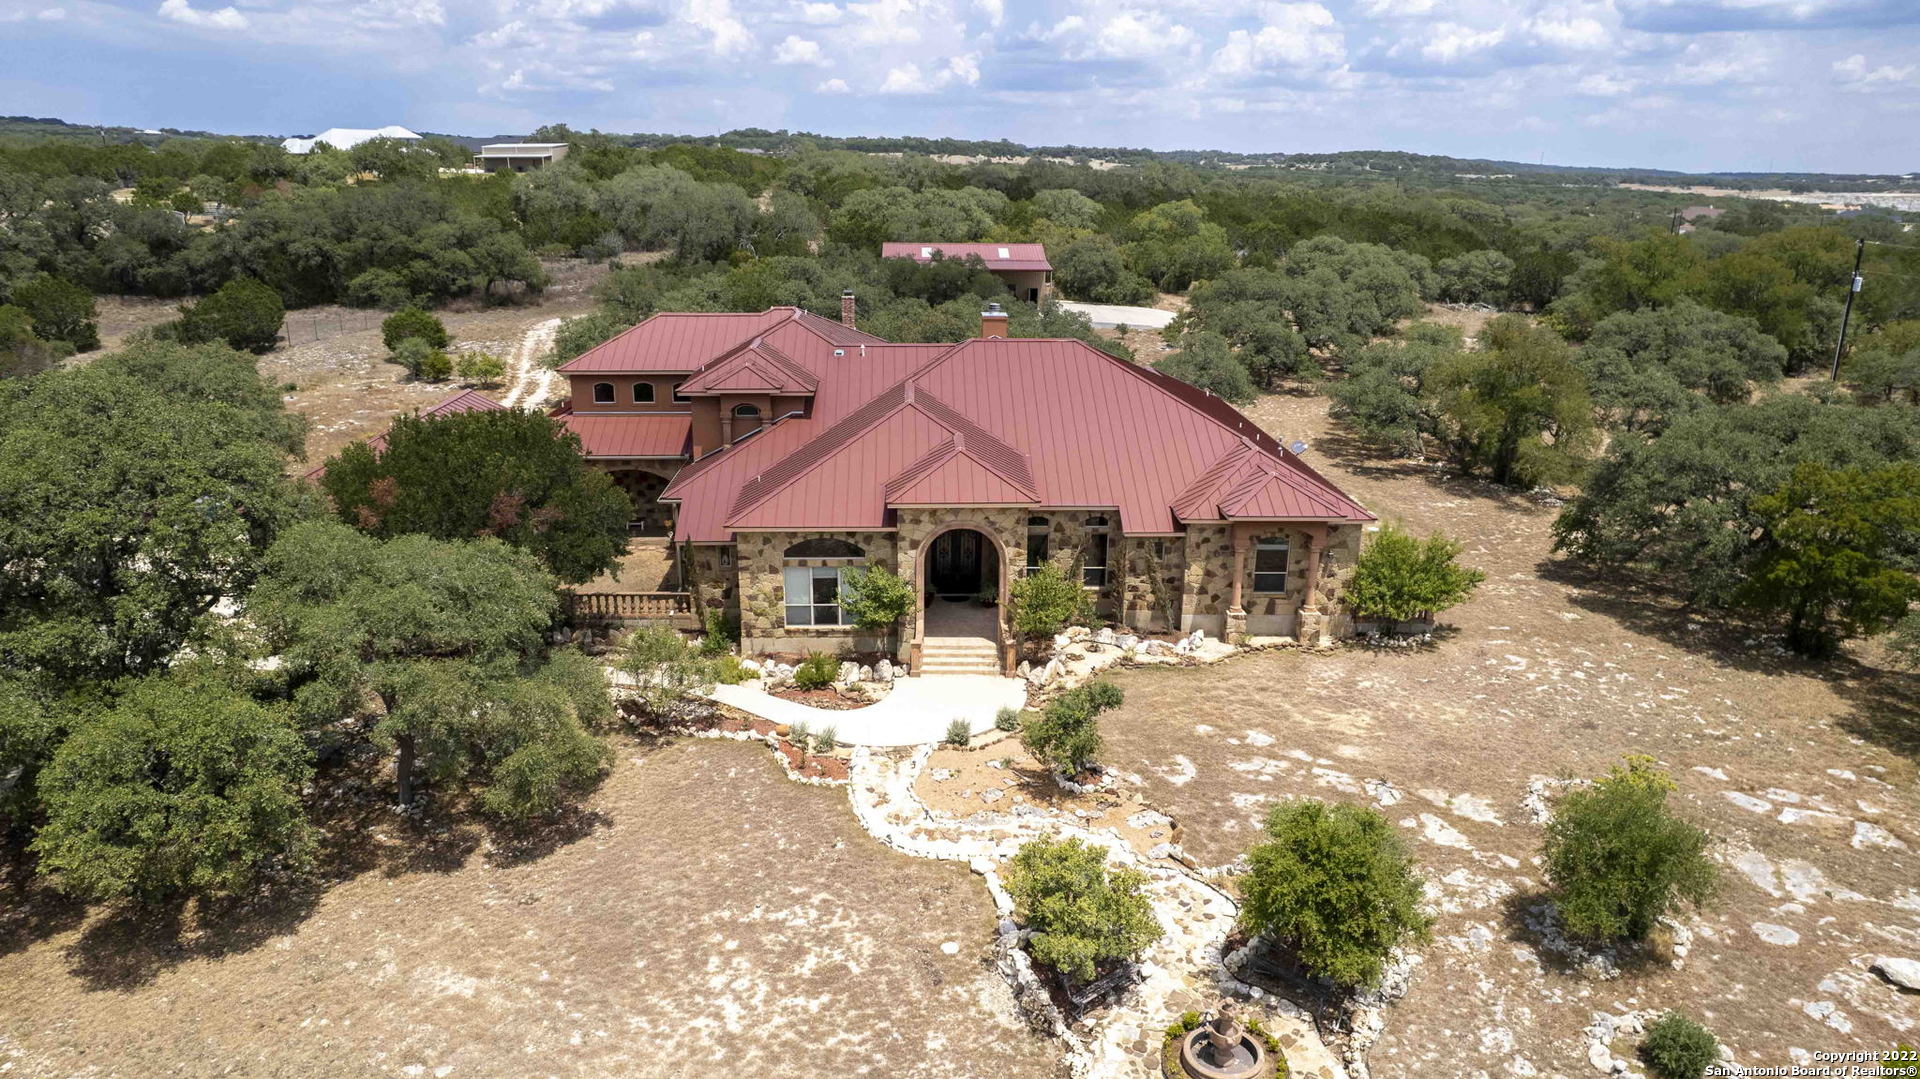 Gorgeous Hill Country Home sitting on 6 acres with plenty of space for entertaining or just enjoying the surroundings. Home has 5 large bedroom suites, Media room, Bar Room, Large Patio with outdoor kitchen for BBQing and making homemade pizza. The kitchen is a Cooks dream with an oversized pantry, large island, 2 vegetable sinks, and an open concept. 2 Ice Makers and 2 Beverage Refrigerators so that you never run out of a cold drink. Listen to music from every room in the house with Surround Sound. 4K projector in Media has been recently purchased. Two entrances to a 50ft by 30ft RV Barn in the back so you never have to back up the RV. The Barn is equipped with RV connections, Full bath, 2 large Chain Link Garage Door Openers, Sun Lit roof, and a 50ft by 20ft Covered Patio and fenced. The community has access to Canyon Lake and a boat ramp. The community also offers many amenities from club house, basketball court, volleyball, jogging trails, and much more.